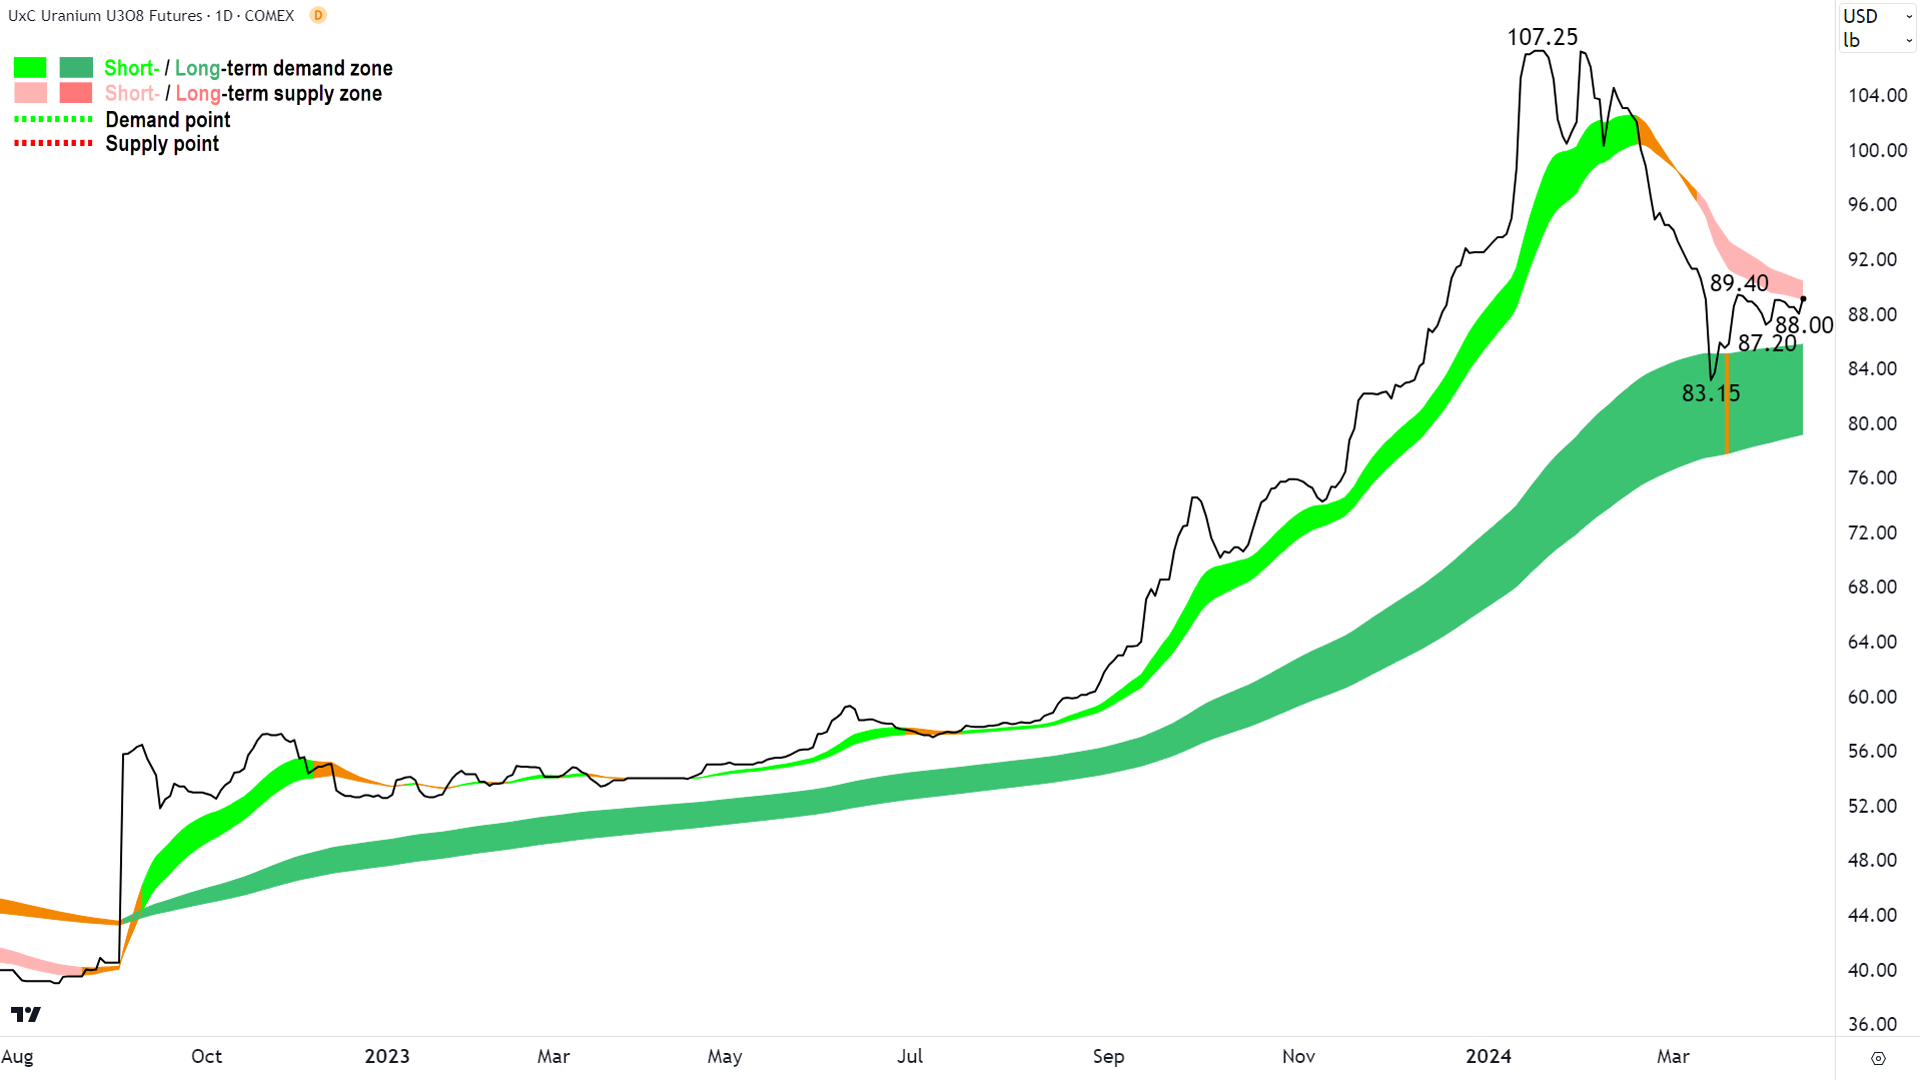 Close to resuming the long term uptrend